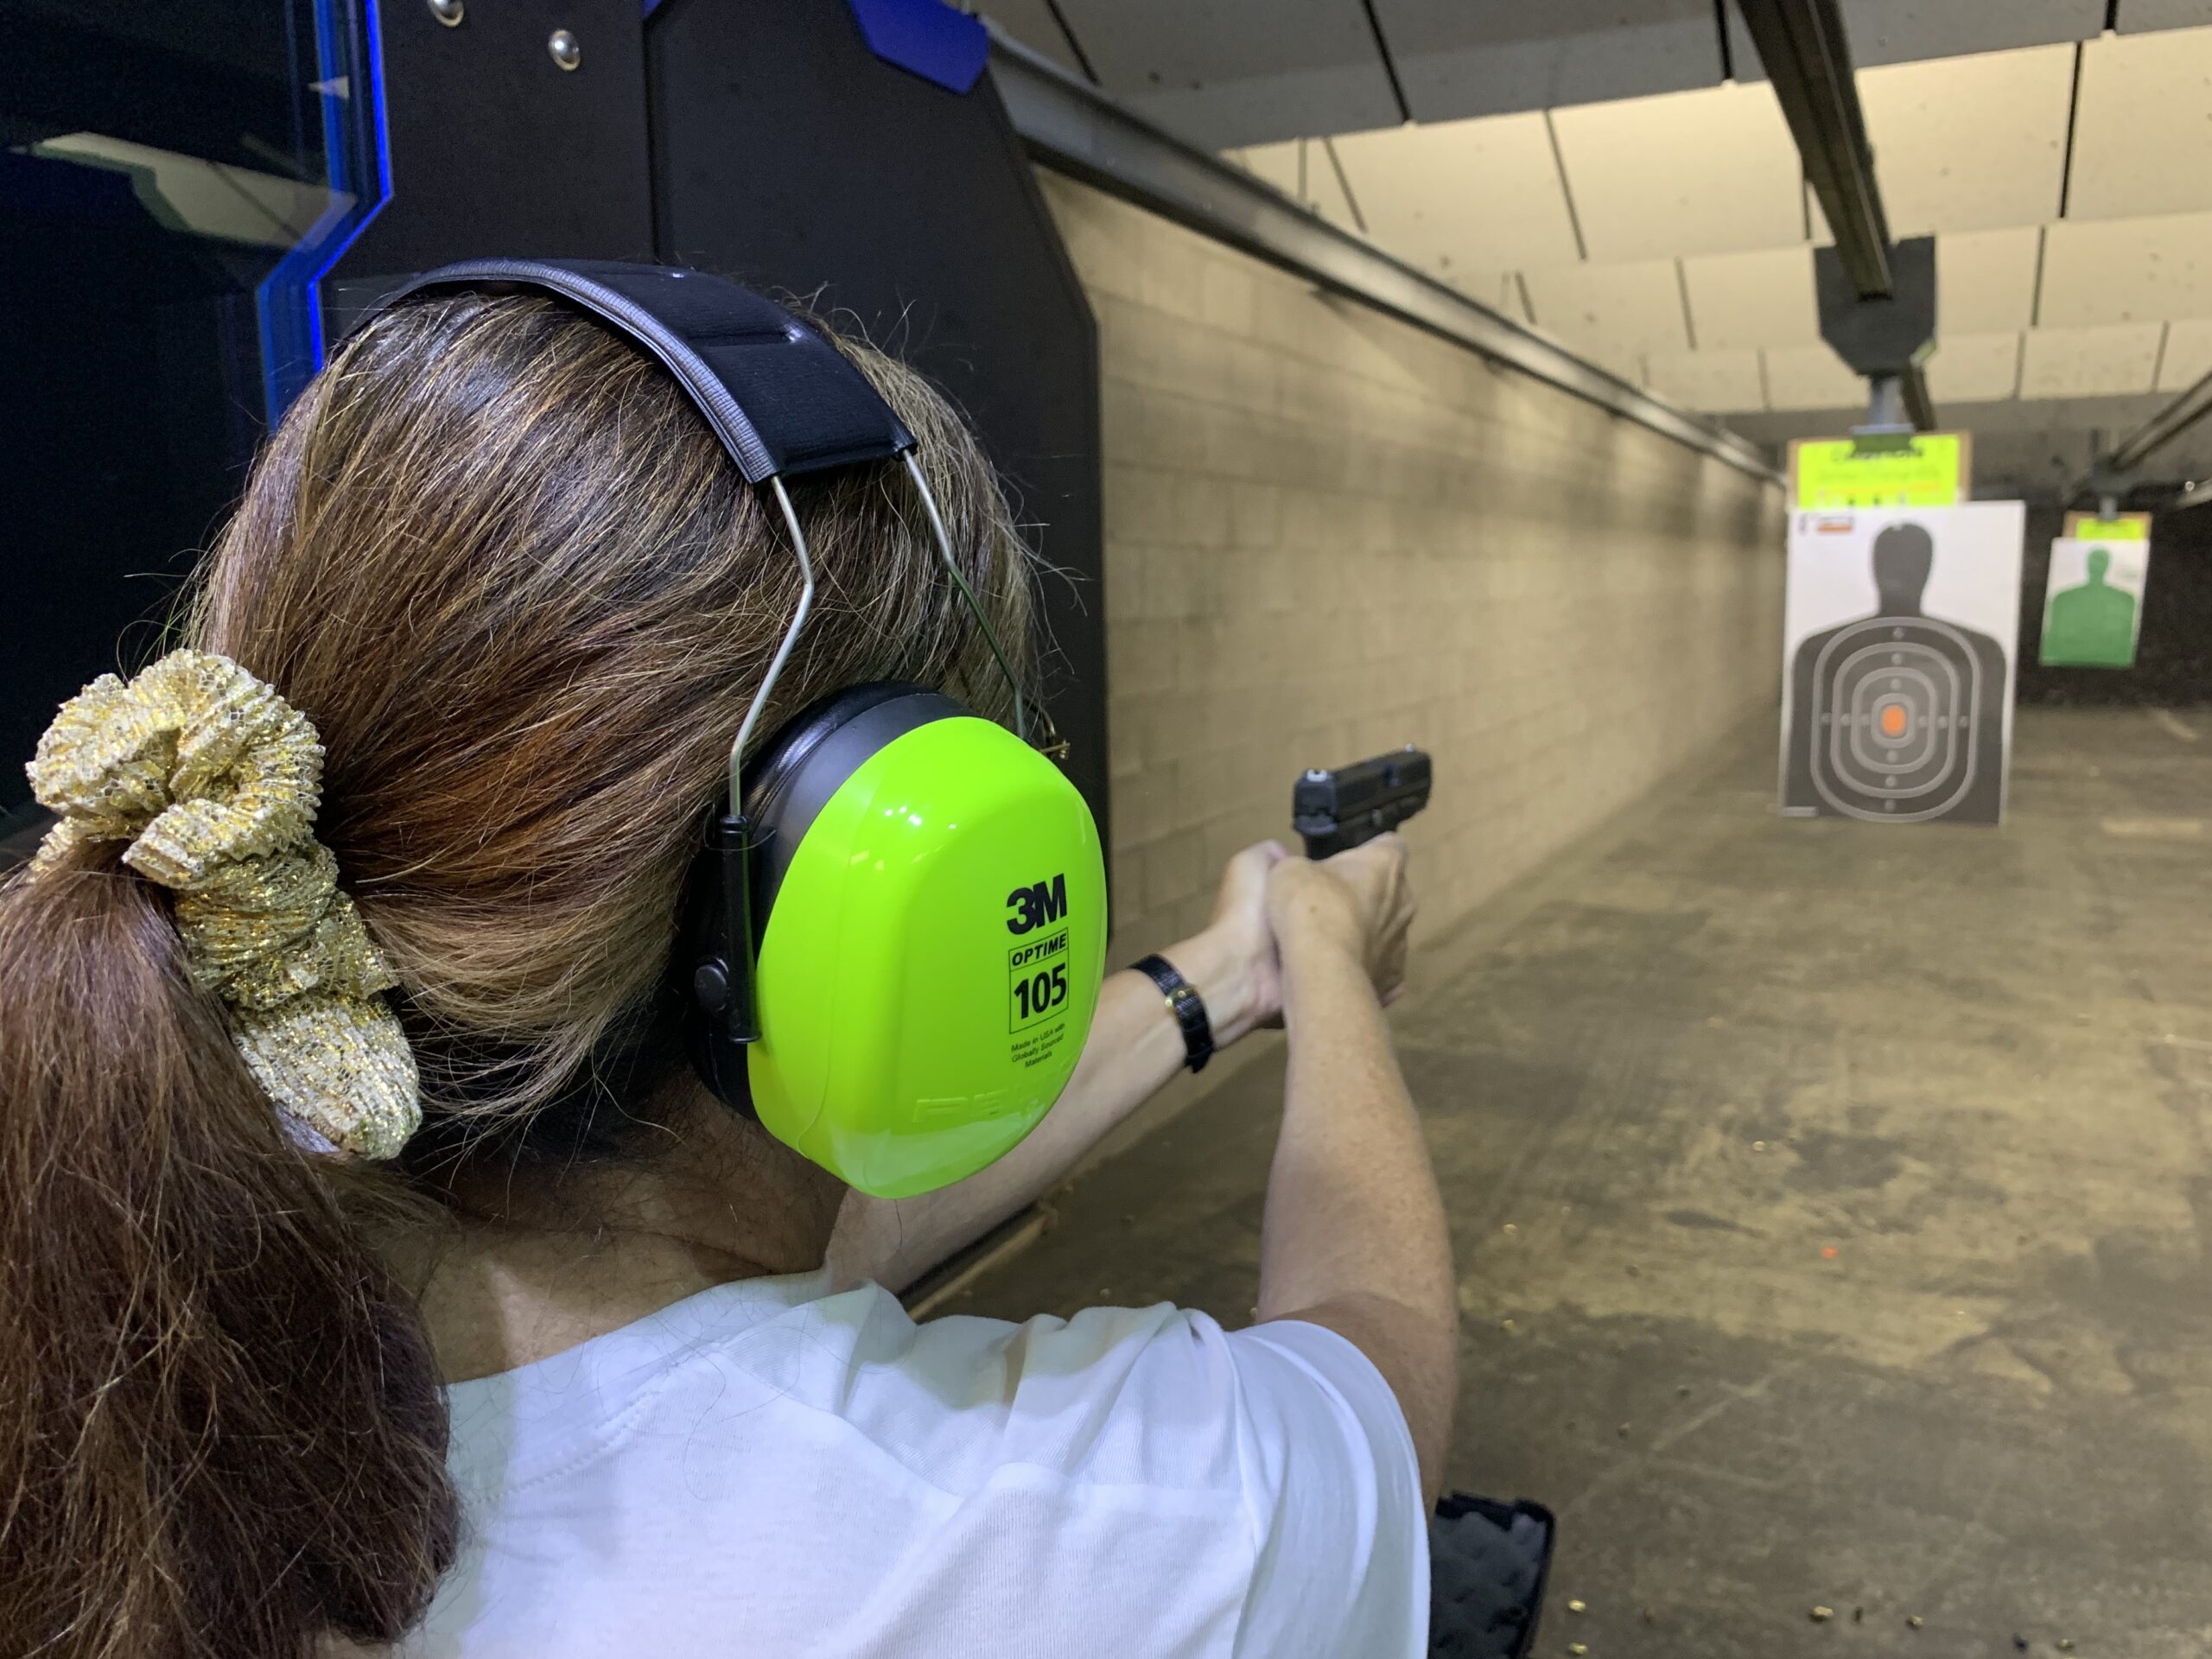 Taking new shooters, like your wife and mother-in-law, to the range can be surprisingly useful.